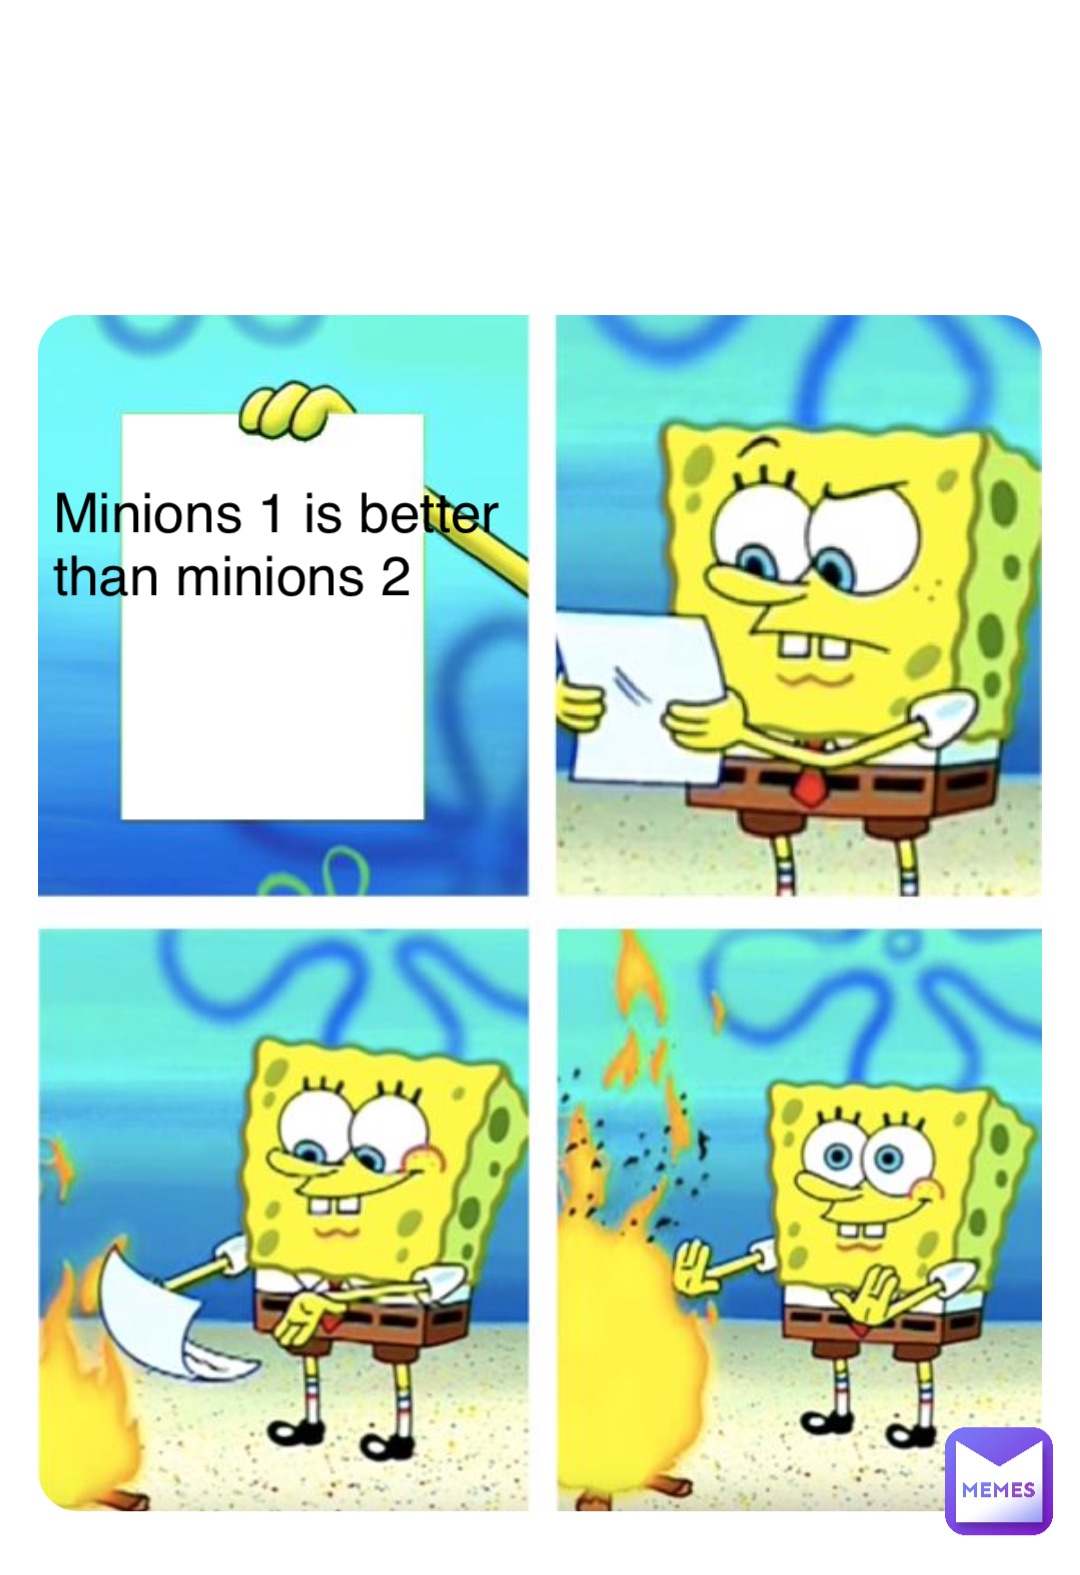 Double tap to edit Minions 1 is better than minions 2